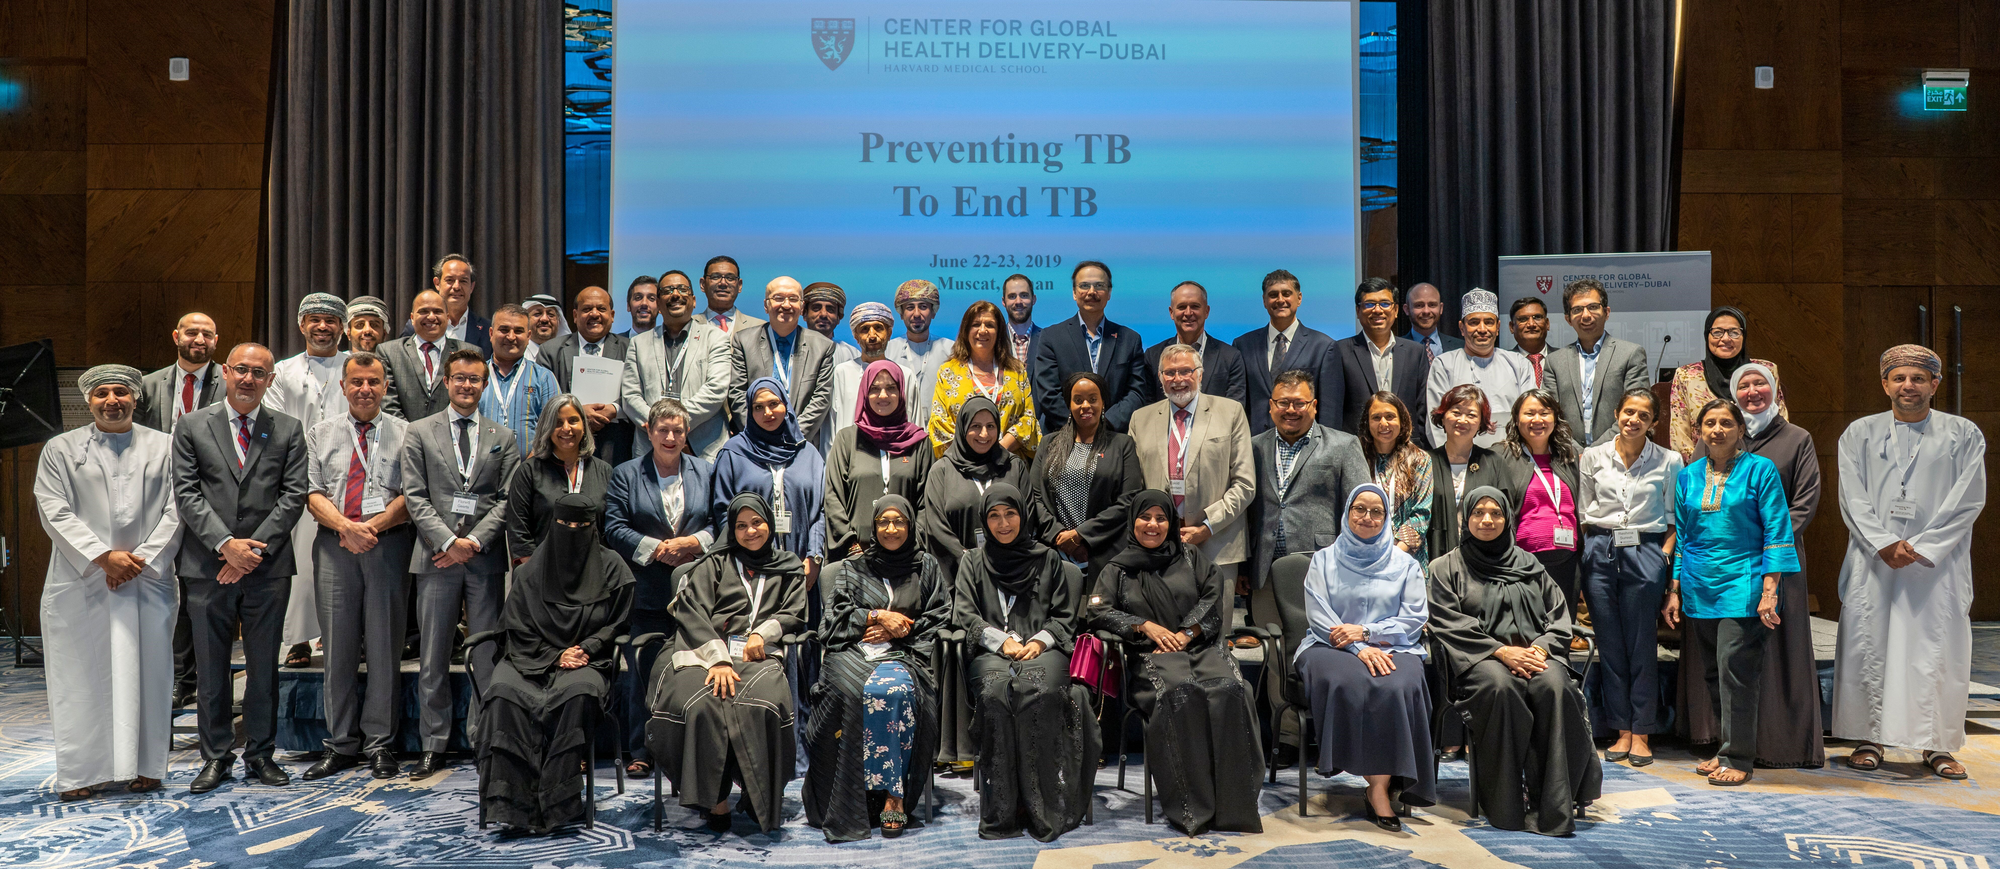 The 1st Middle East TB Experts Meeting